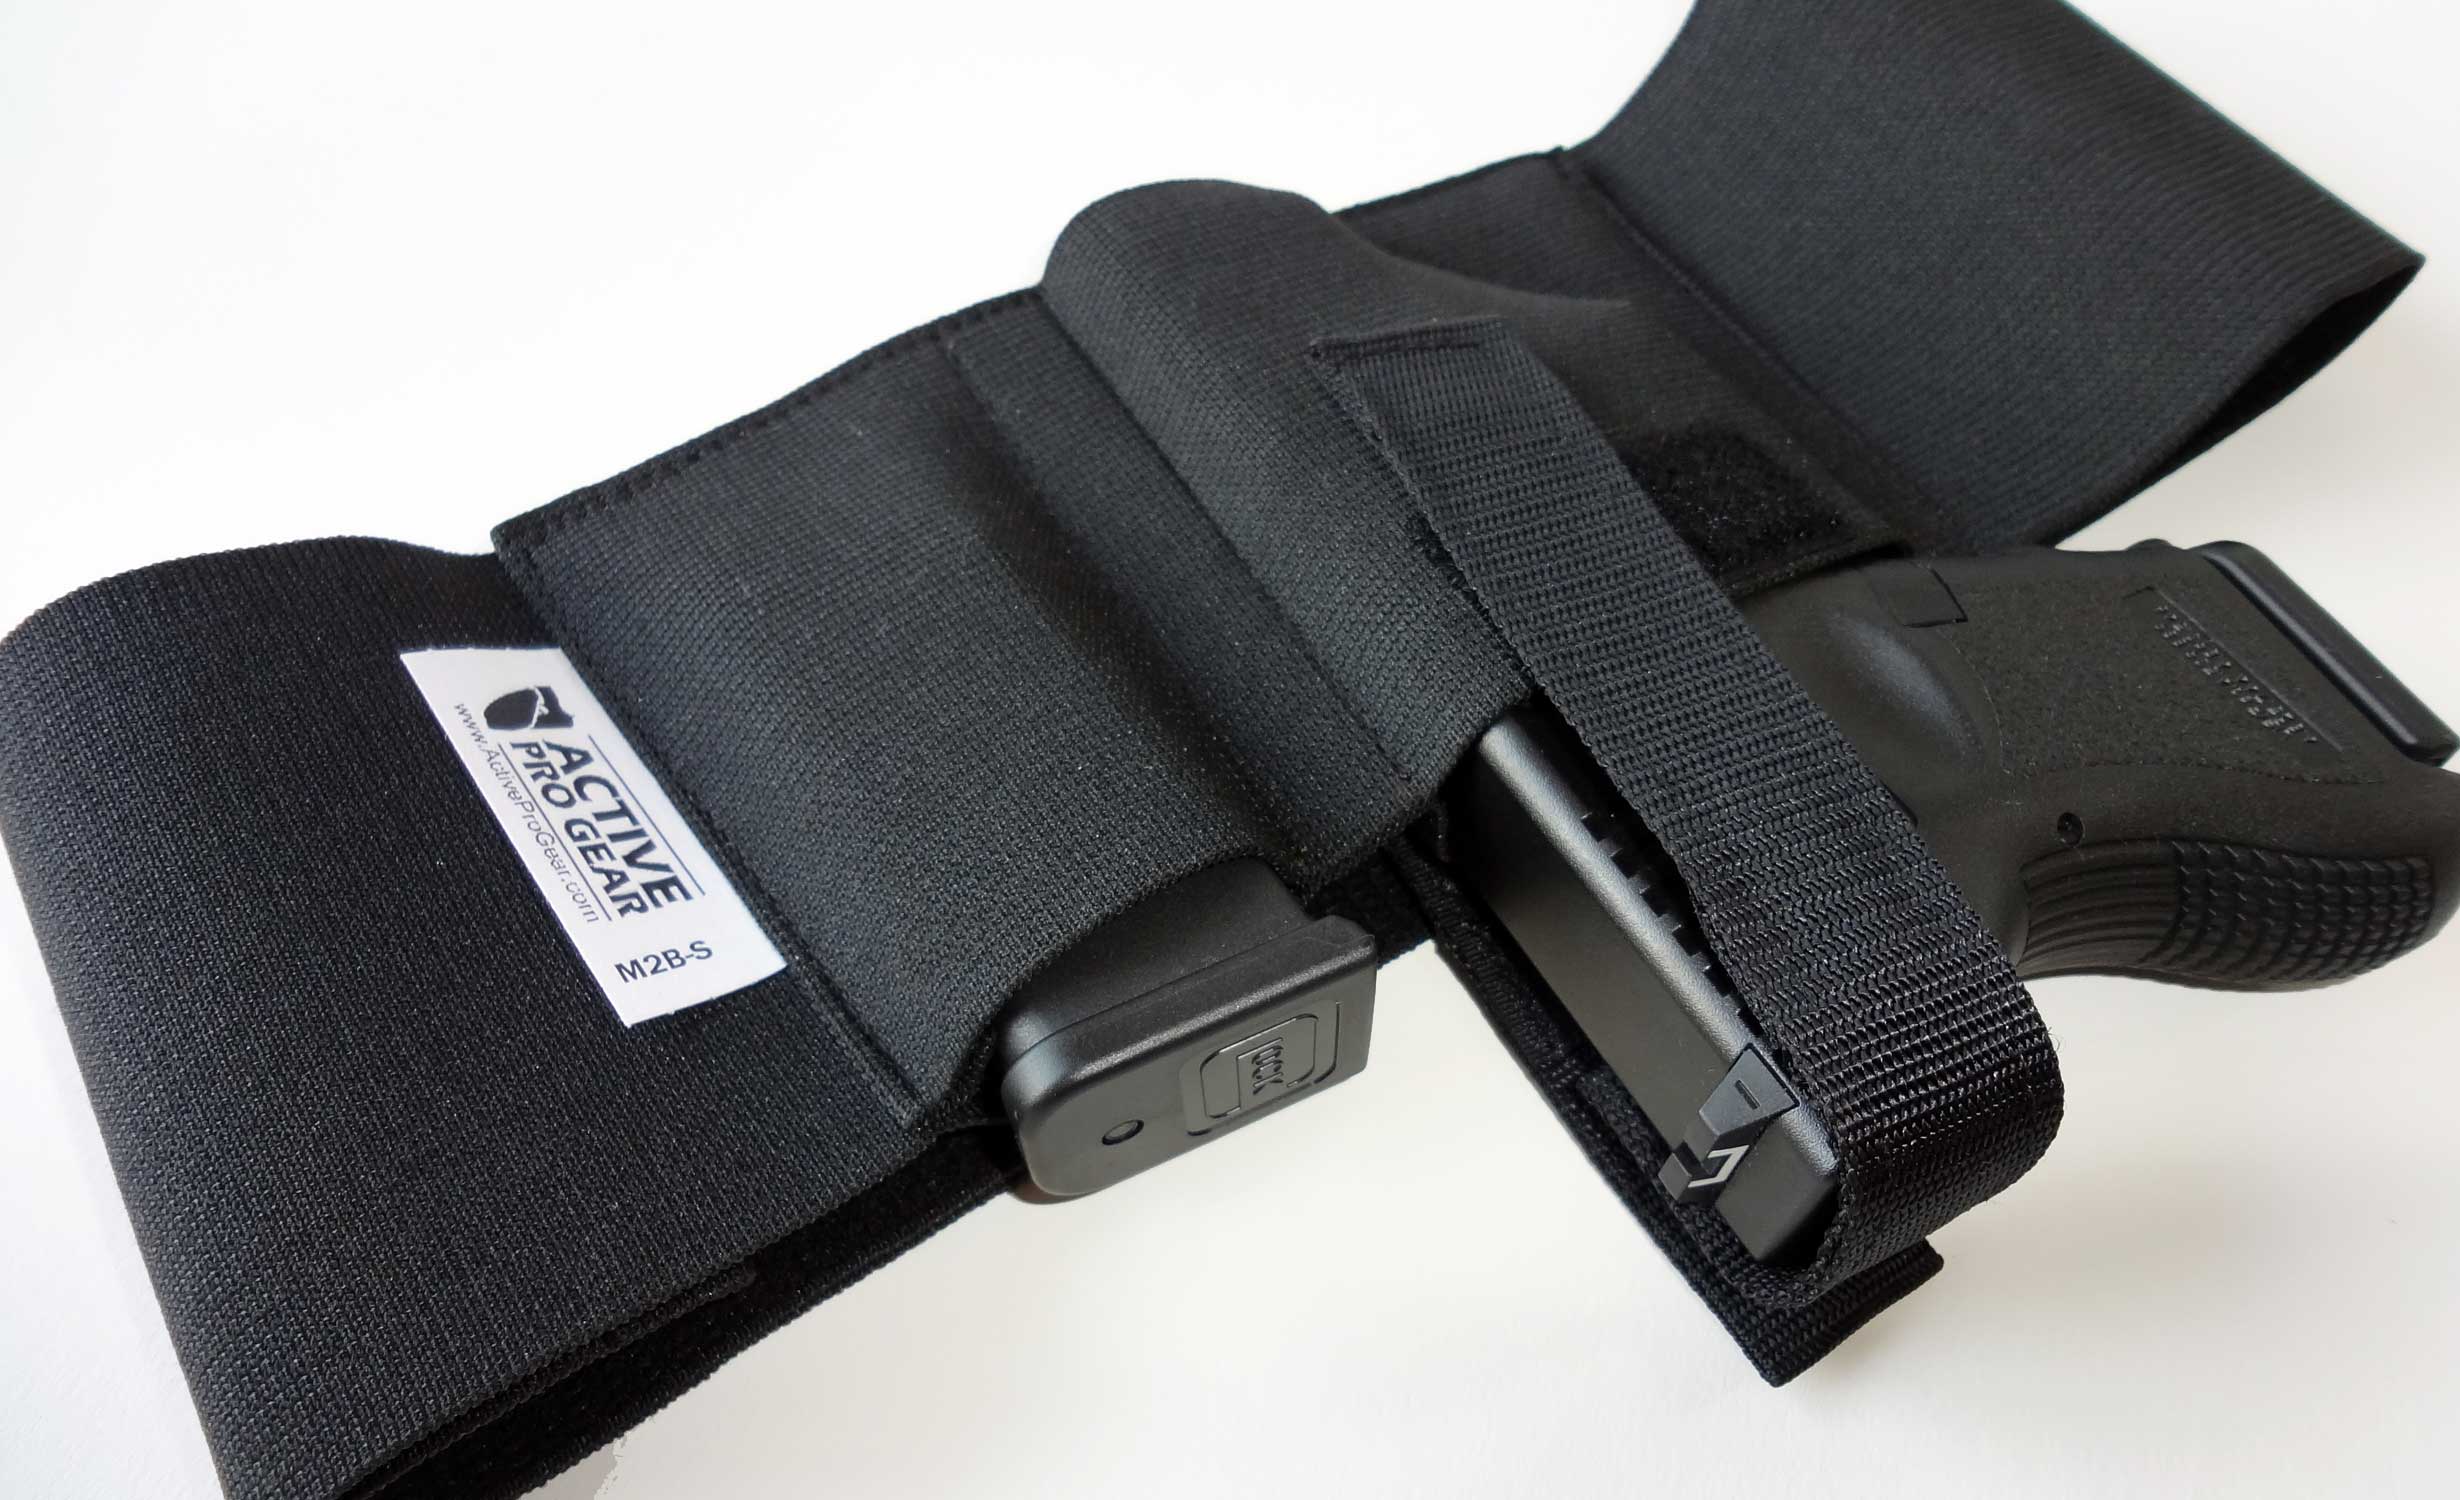  Belly Band Holster for Concealed Carry-Gun Holster